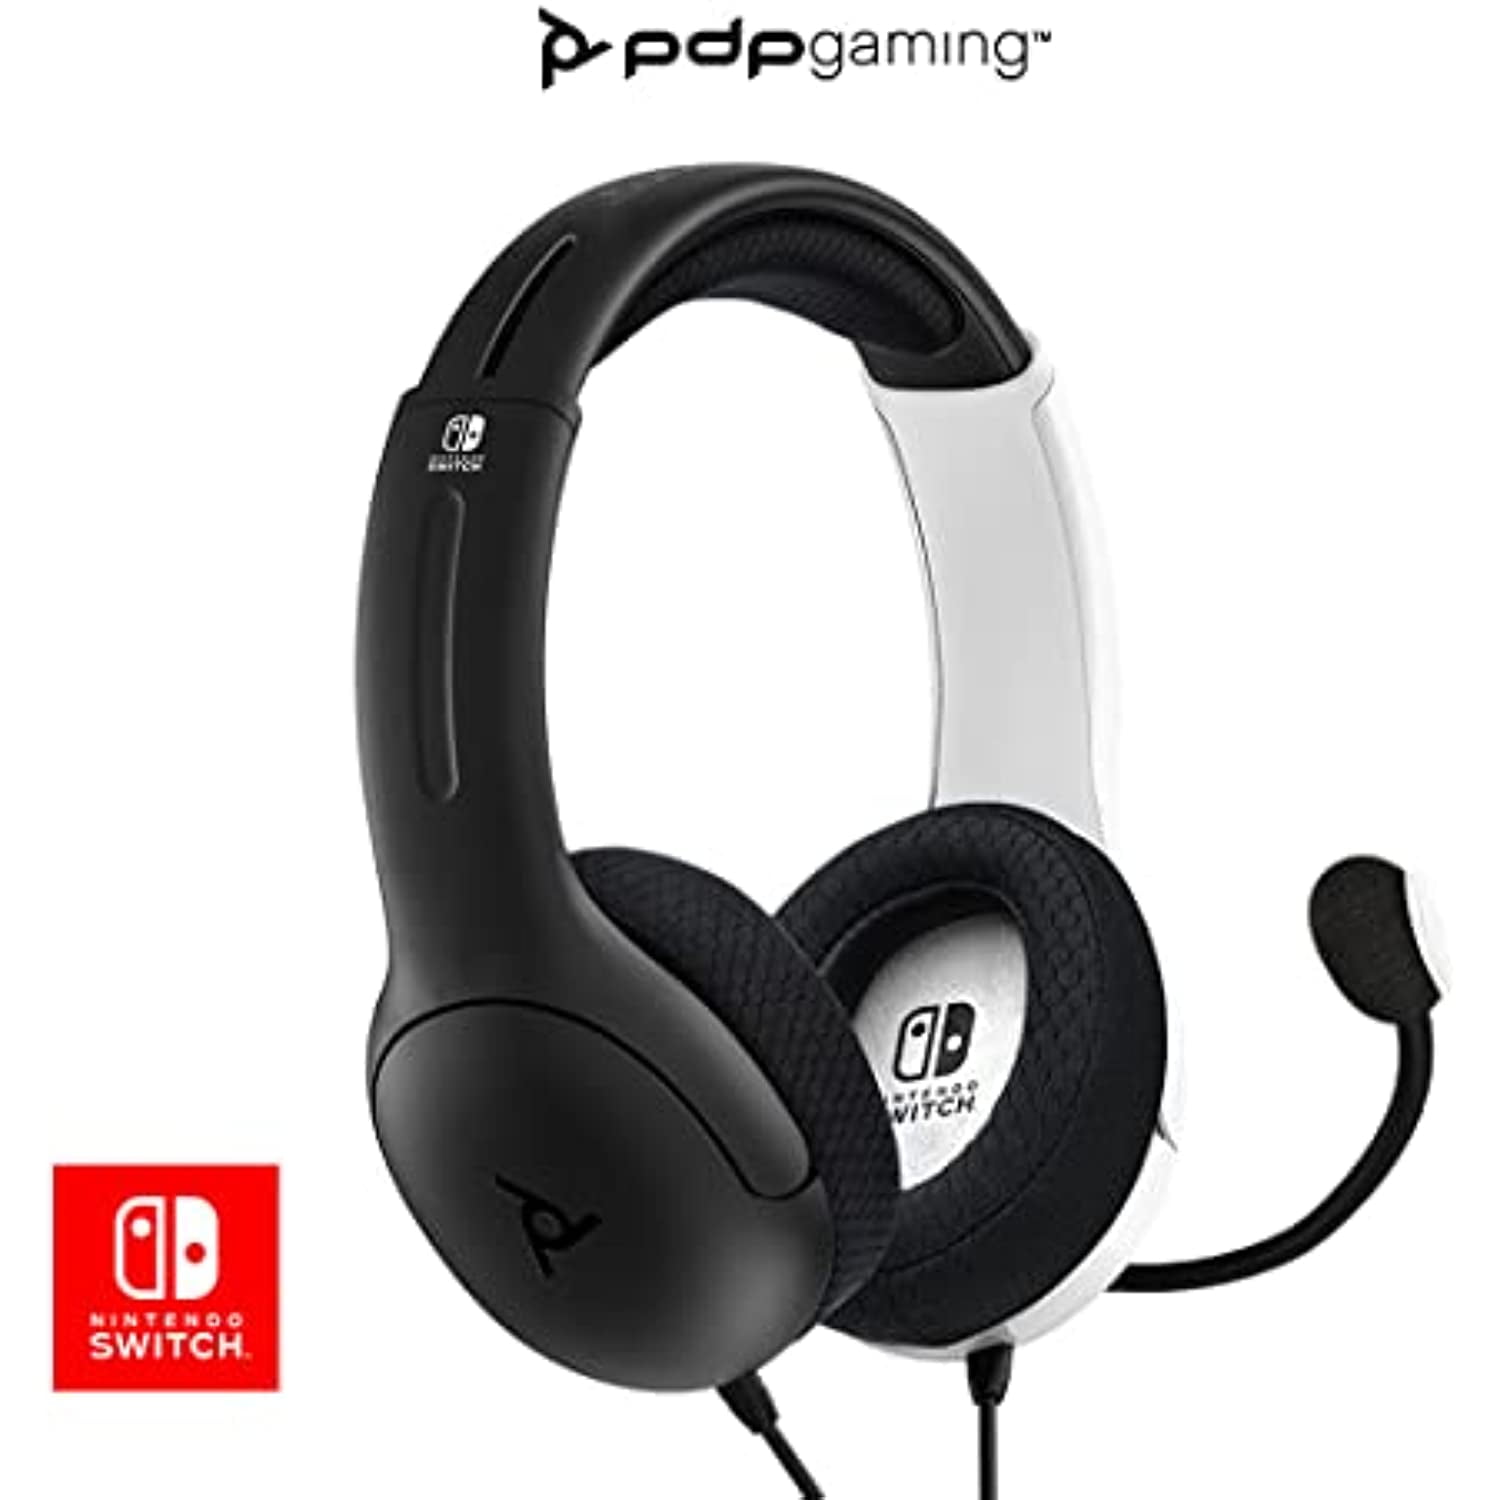 Pdp Gaming Lvl40 Stereo Casque avec Mic pour Nintendo Switch - Pc